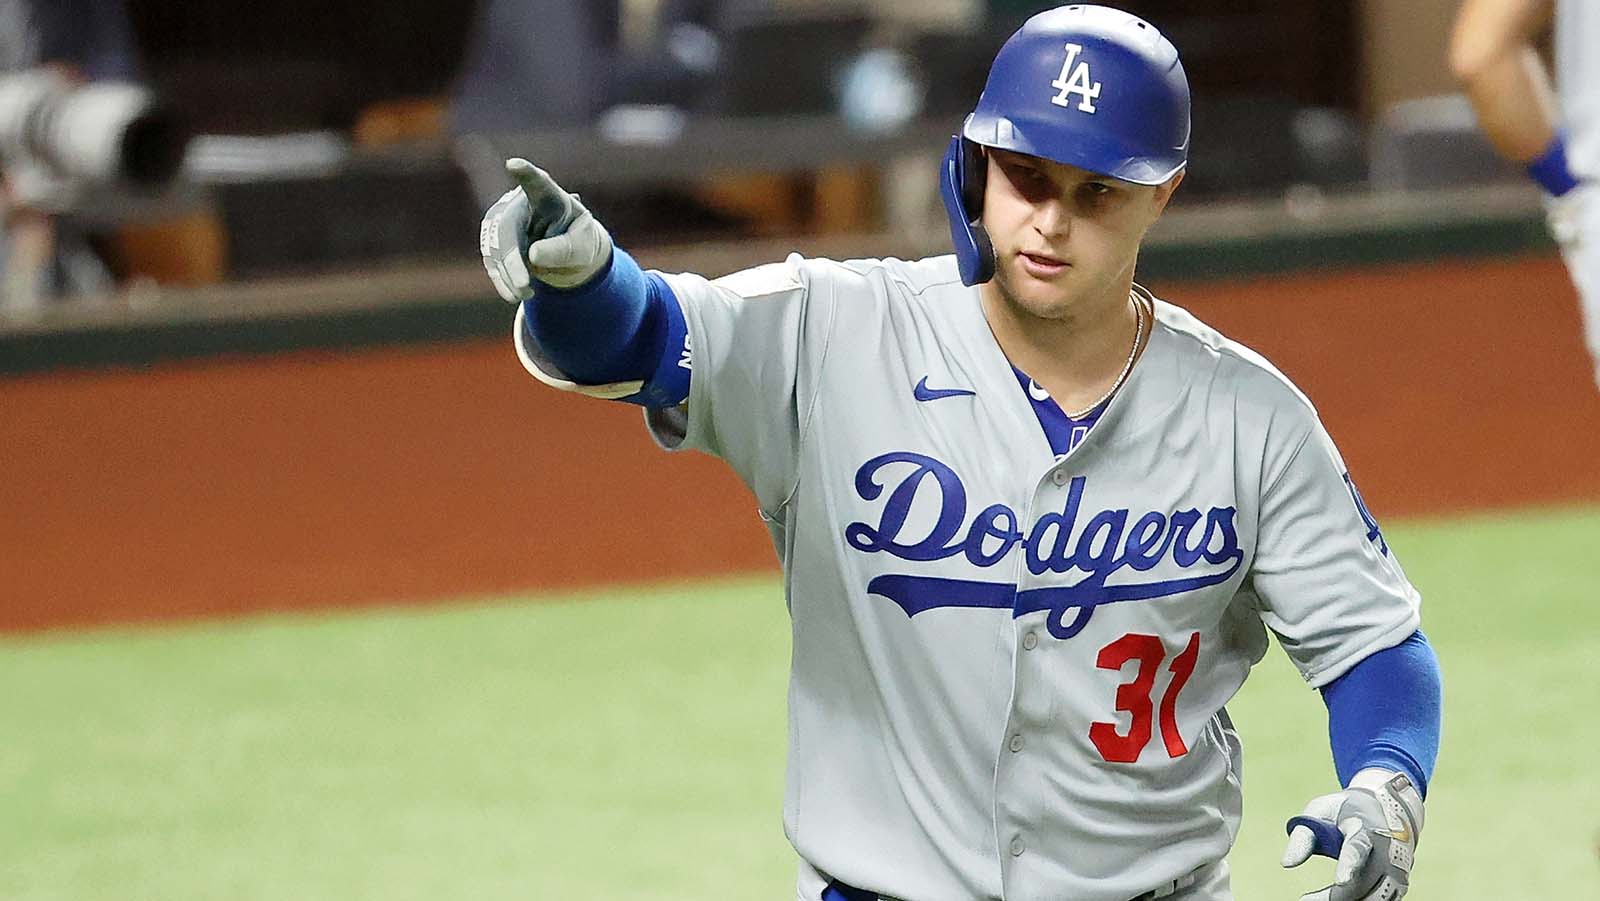 Joctober' continues for Dodgers' Pederson in Game 5 of World